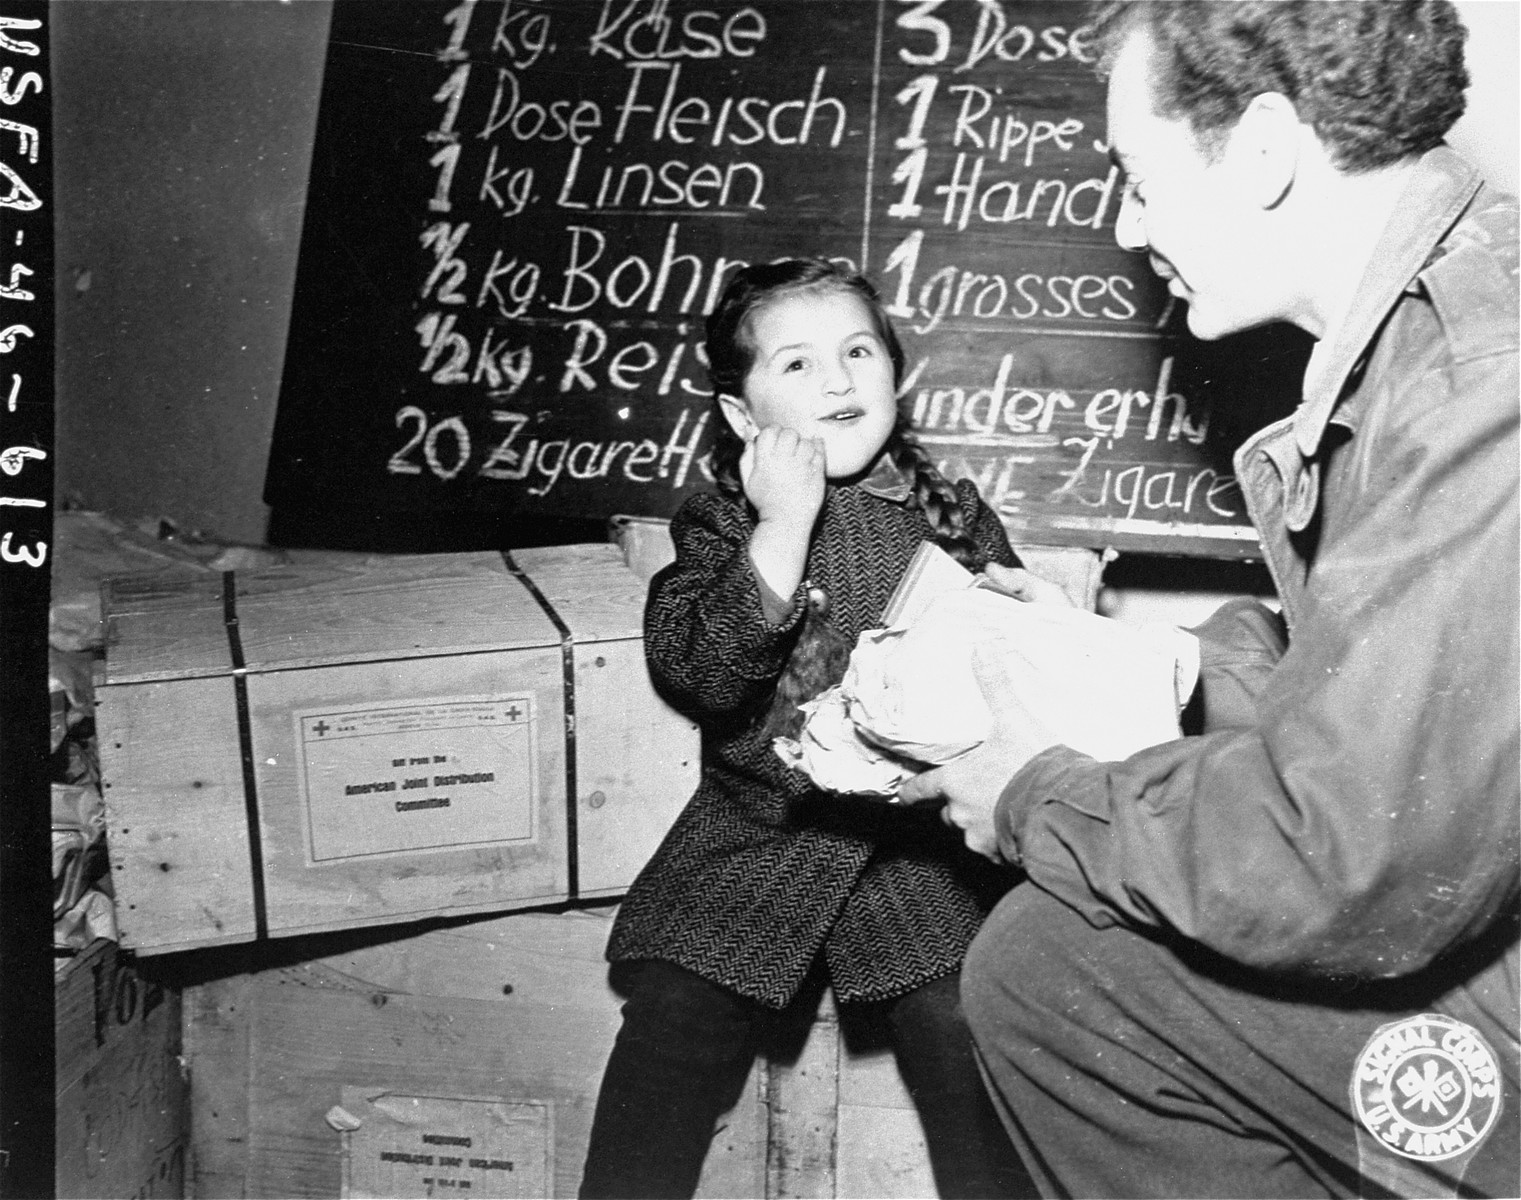 Harry Weinsaft of the American Jewish Joint Distribution Committee, gives food to three-year-old Renati Rulhater, a Jewish DP child in Vienna.  The campaign to distribute food to needy refugees in Vienna is sponsored by the Jewish Joint Welfare Association of Vienna in conjunction with the JDC.